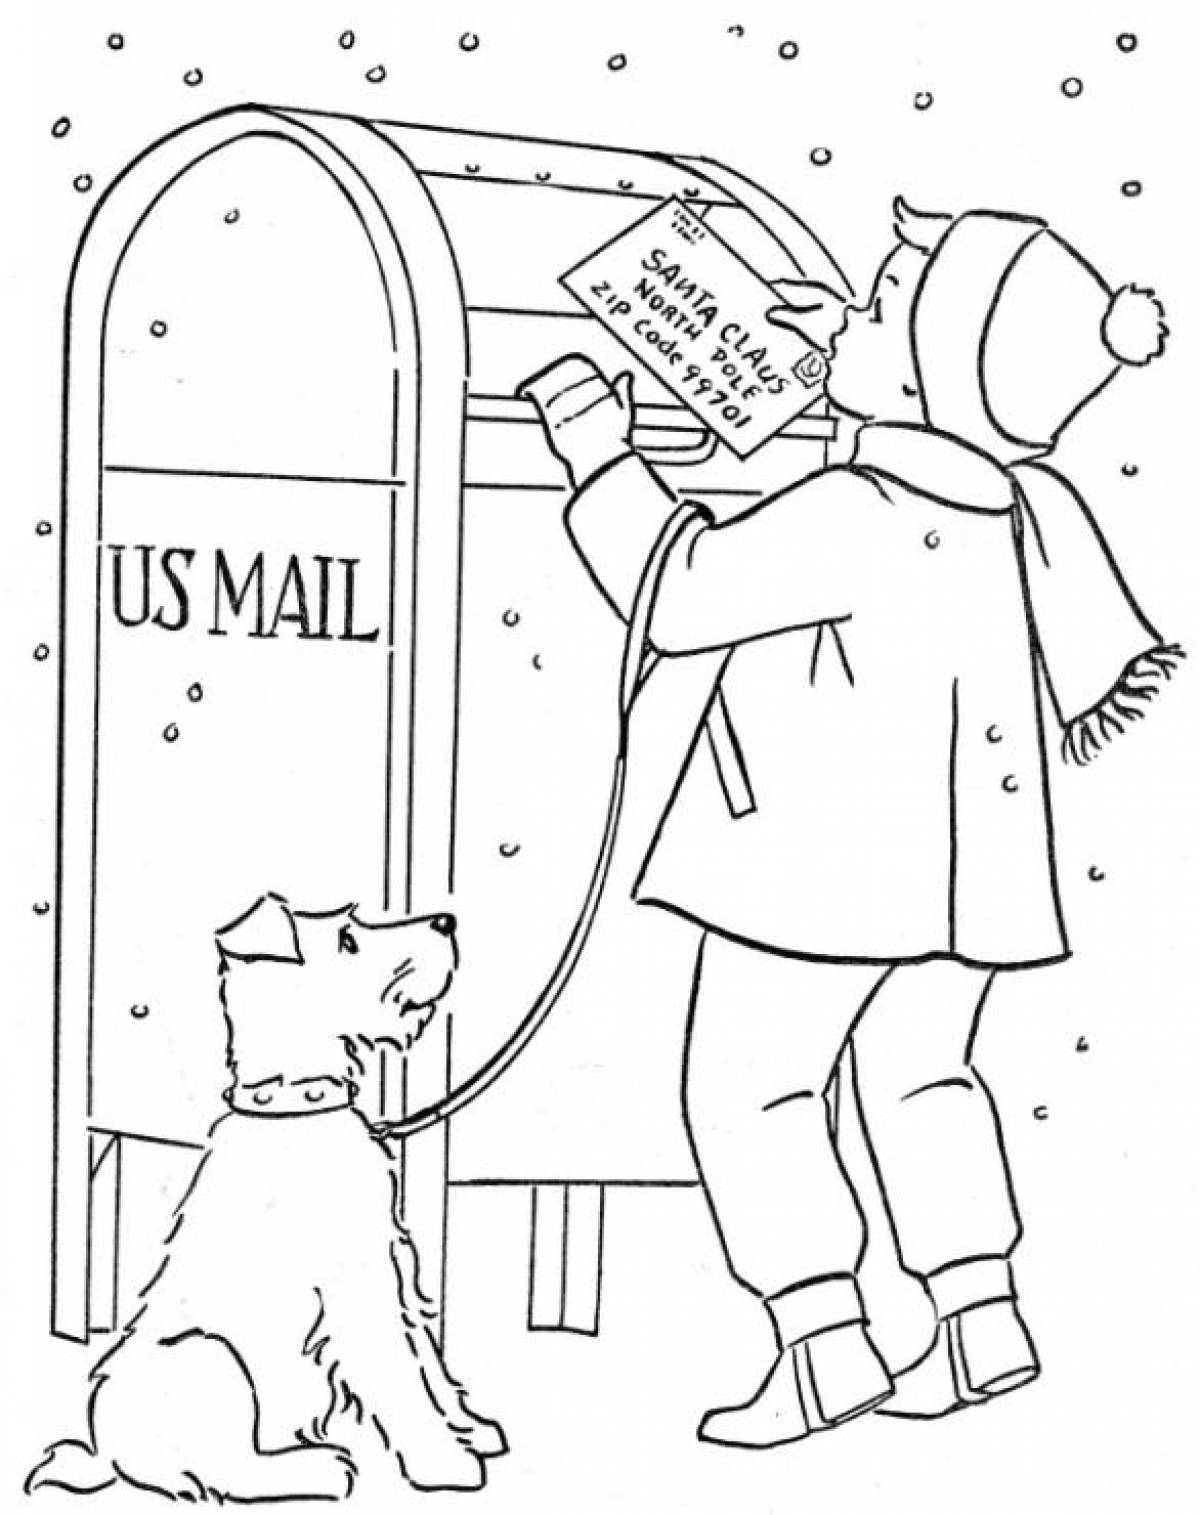 Bright mail coloring